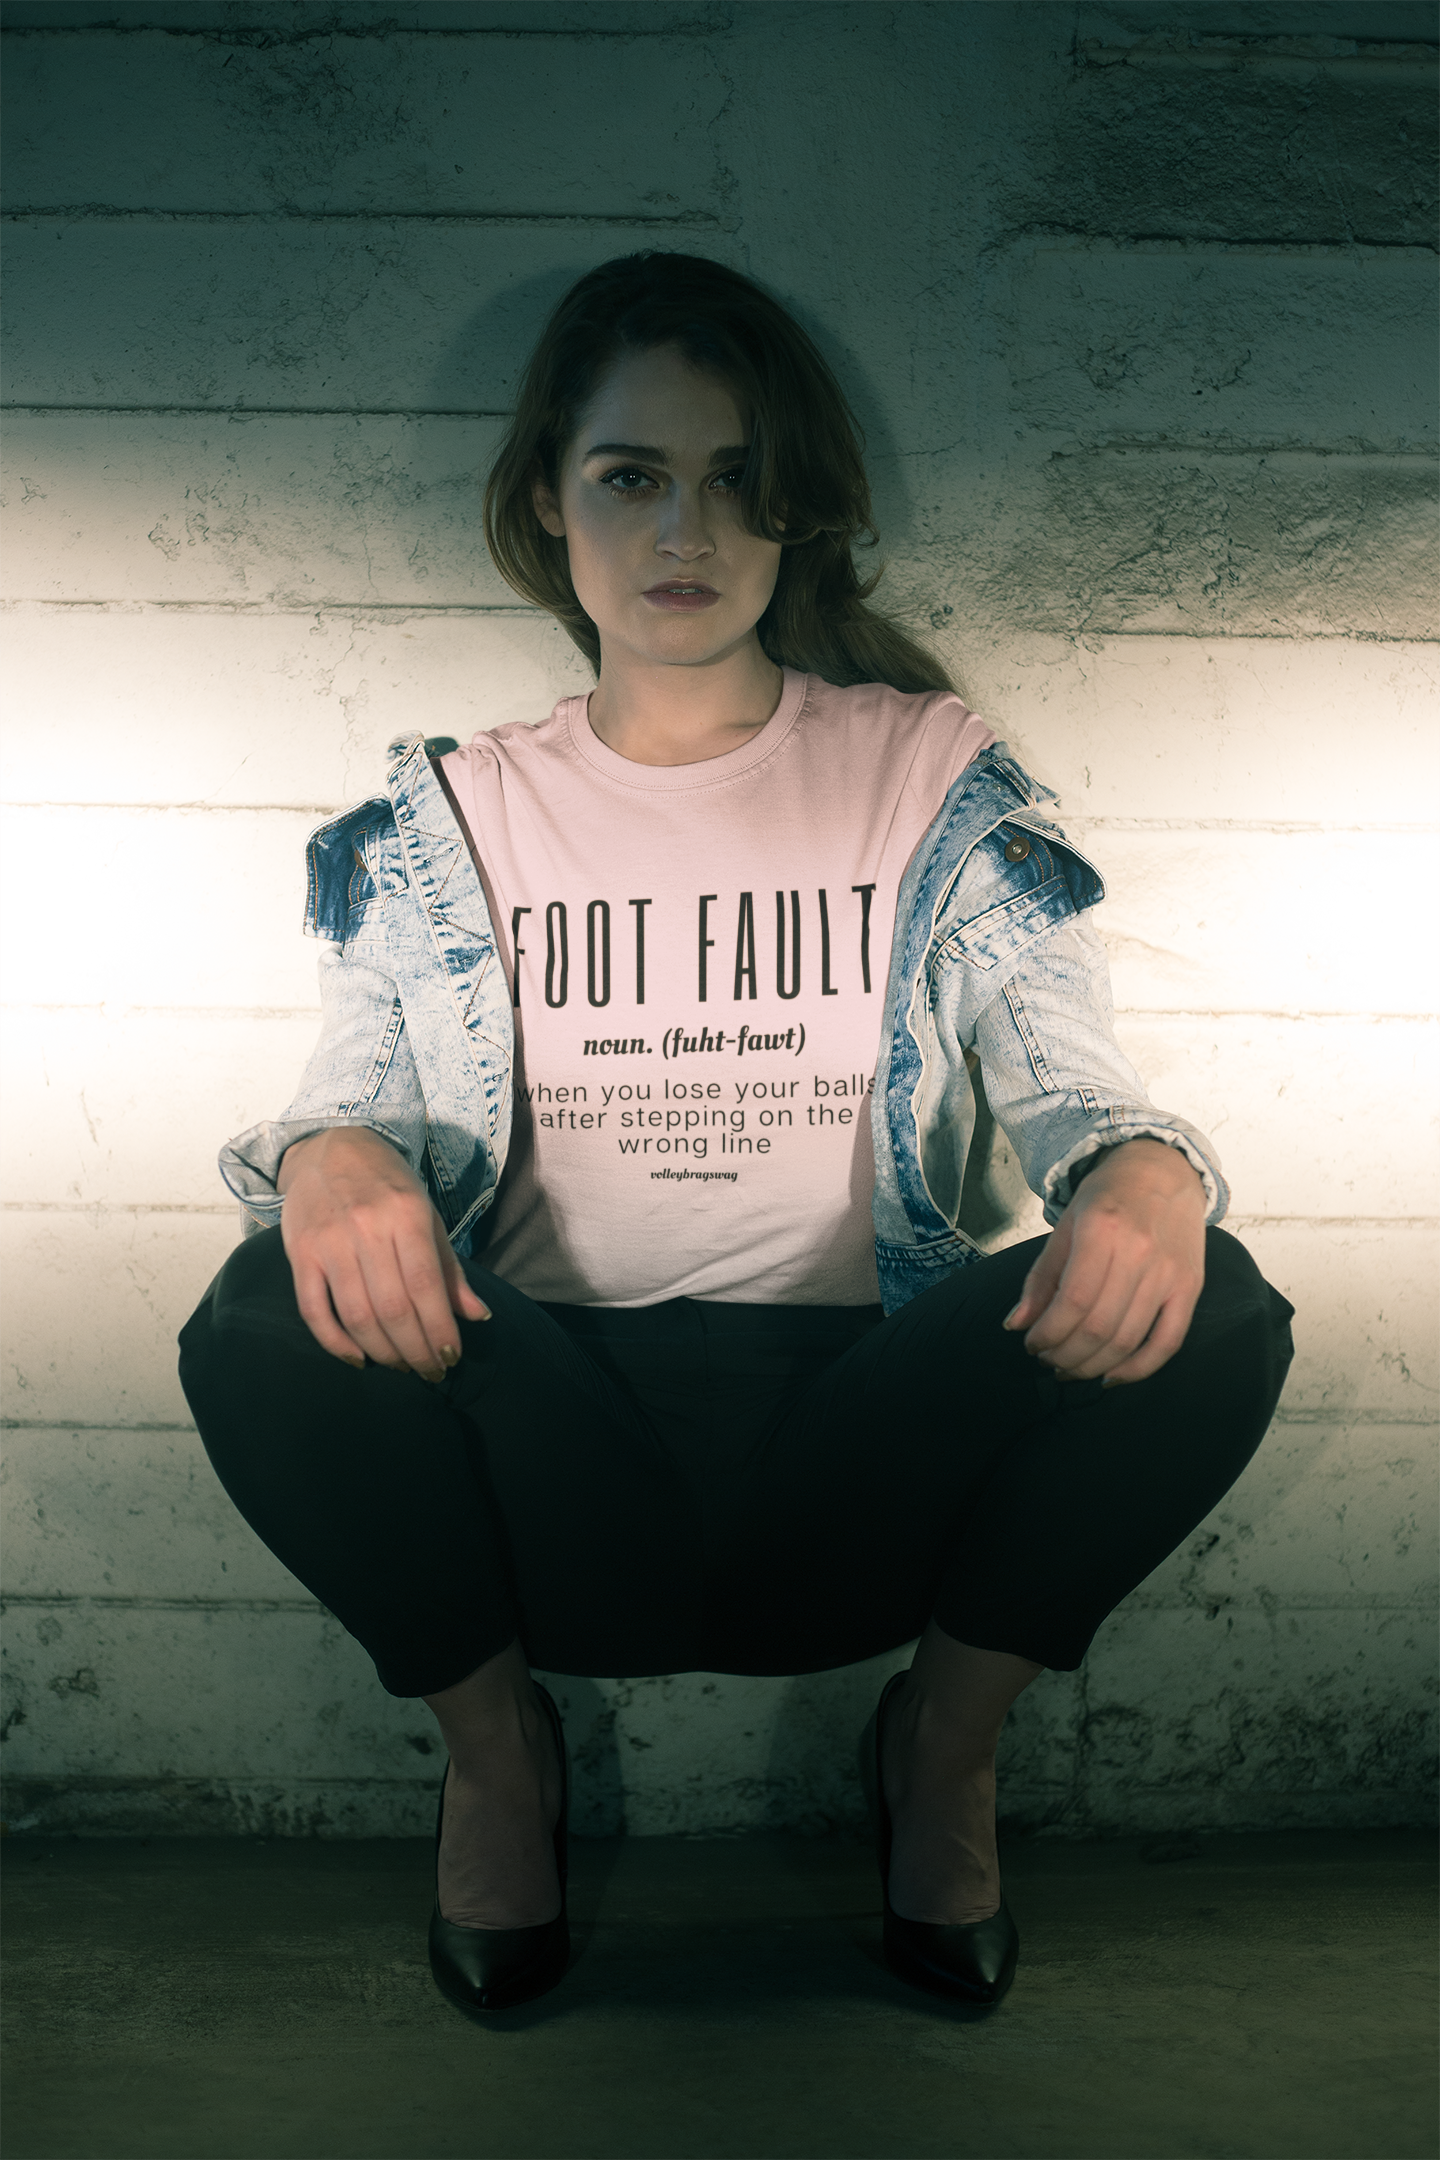 FOOT FAULT (noun) When You Lose Your Balls After Stepping On The Wrong Line volleyball shirt. April Chapple, Launches a Hilarious Volleyball T-shirt Line With Fun Tongue-in-Cheek Designs sure to make players and enthusiasts laugh.